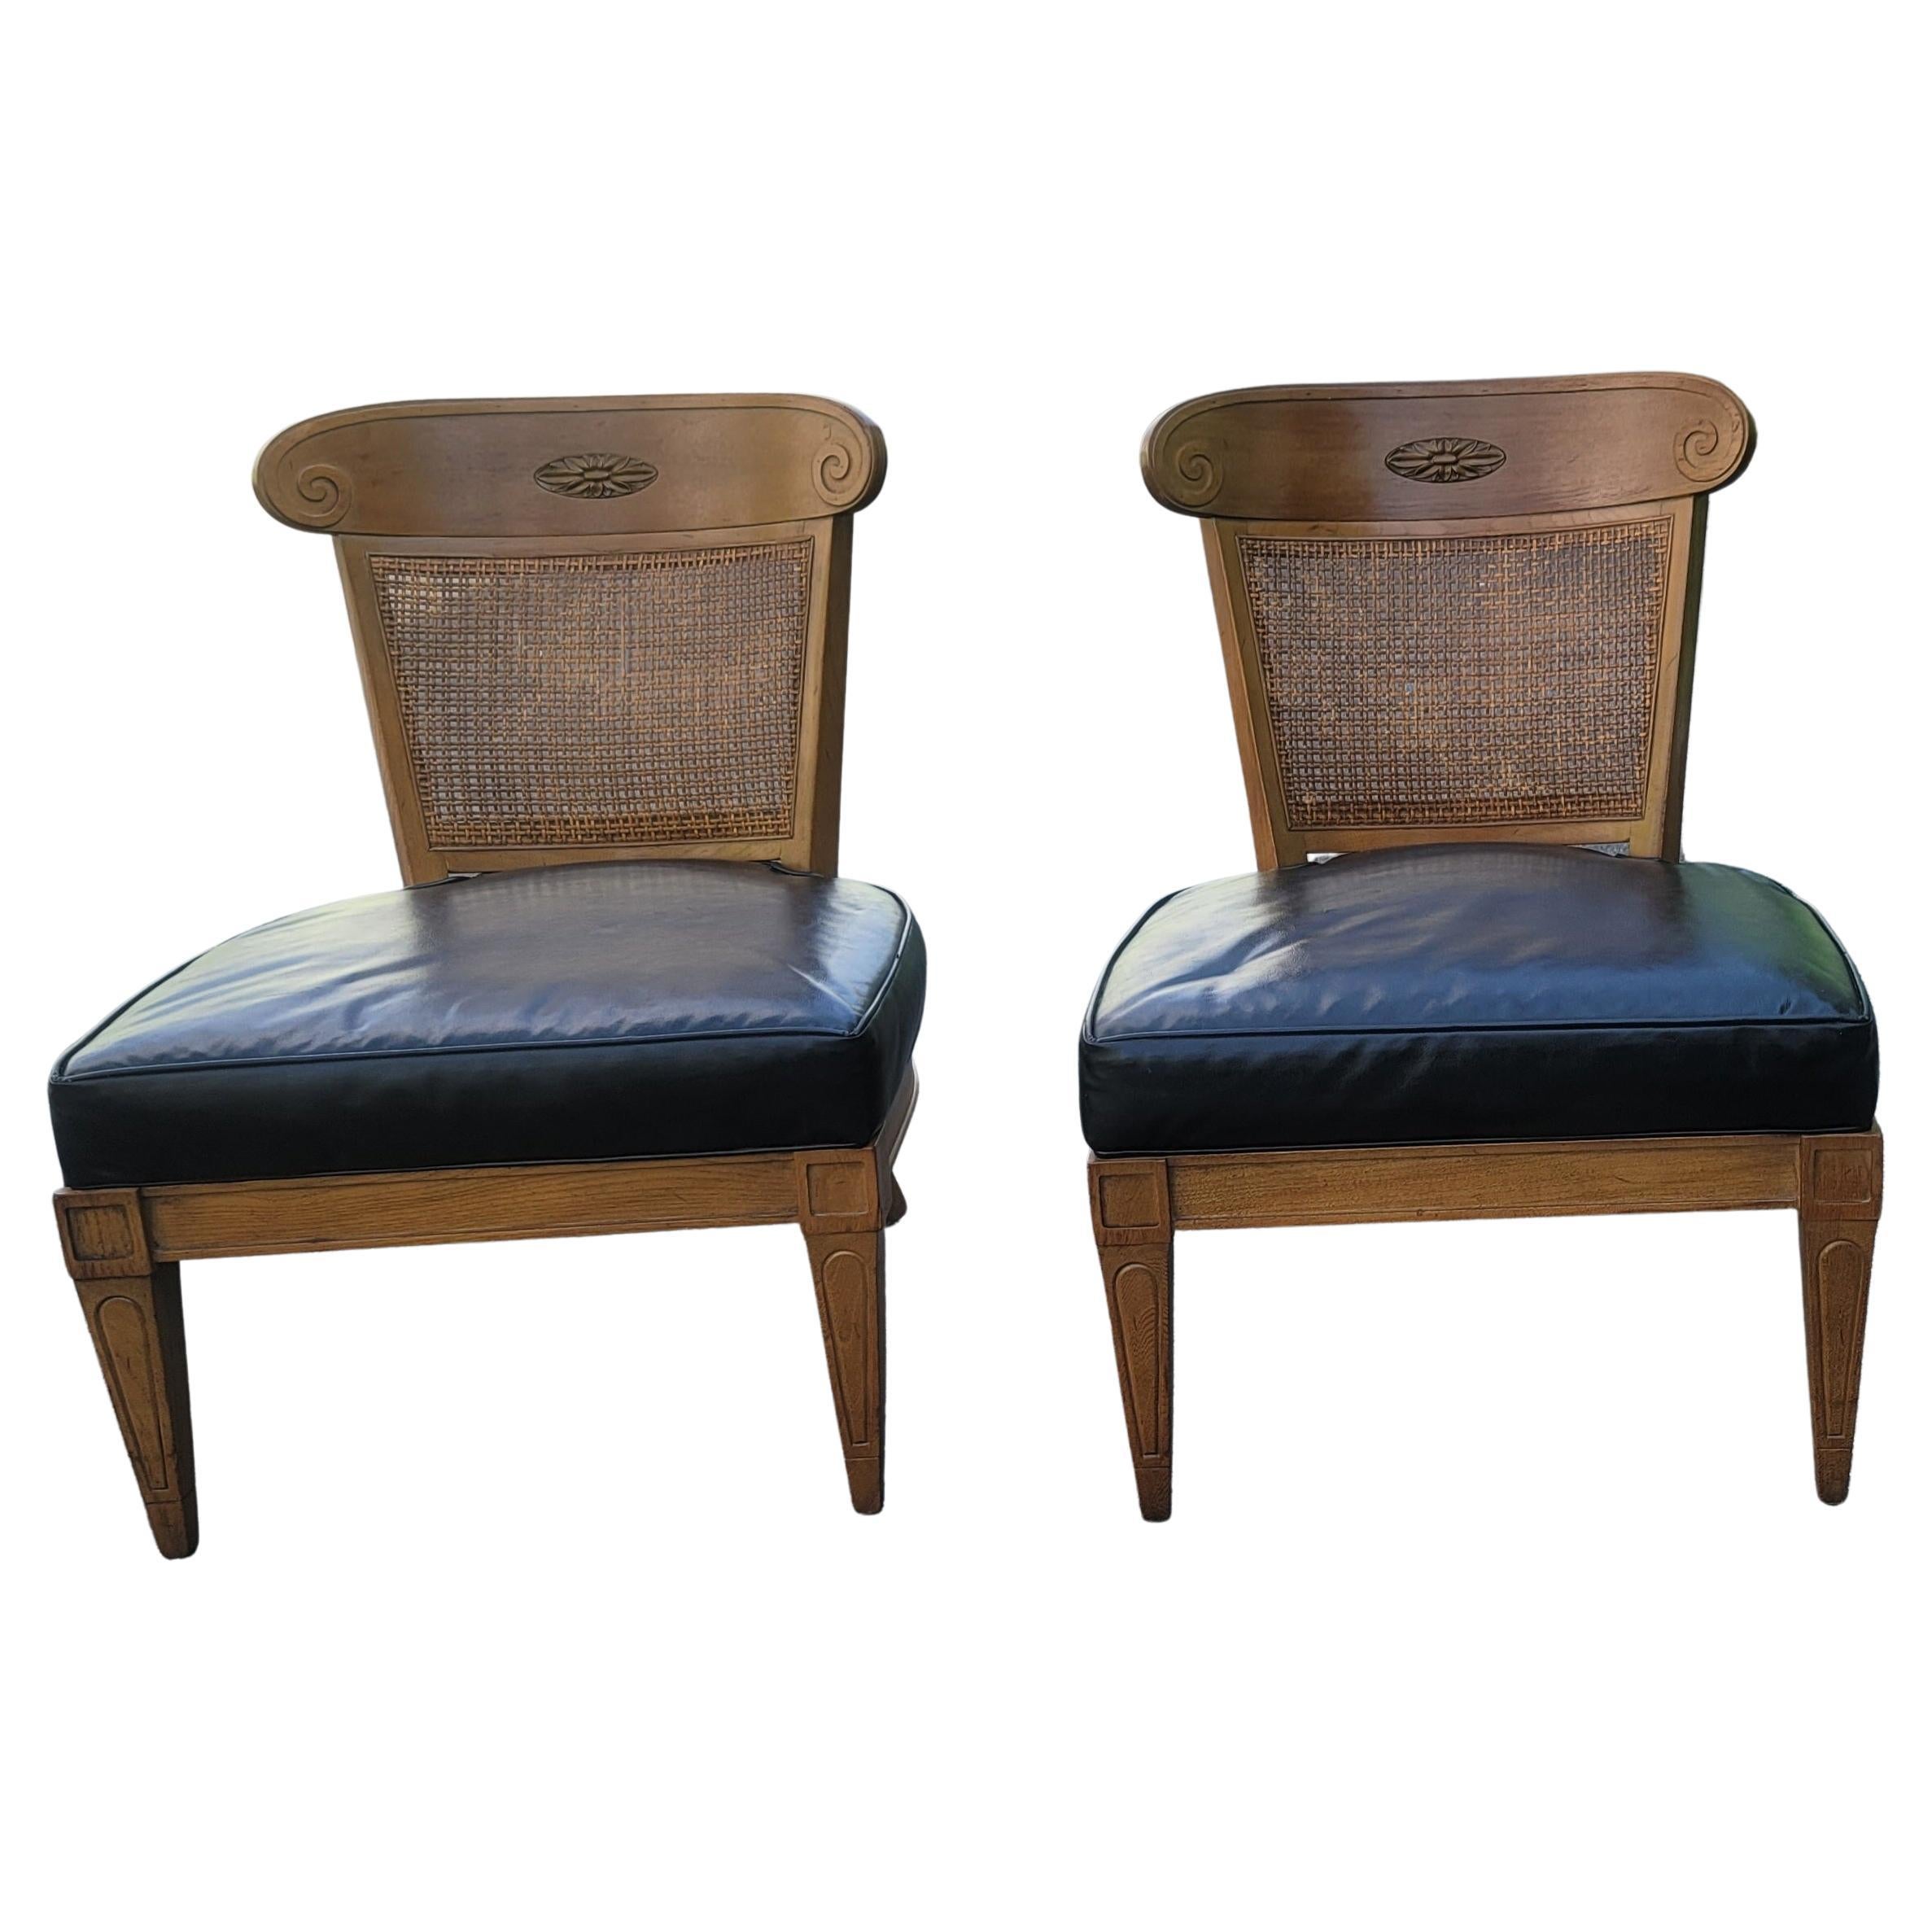 1950s American of Martinsville Walnut Cane Slipper Lounge Chairs, a Pair For Sale 4